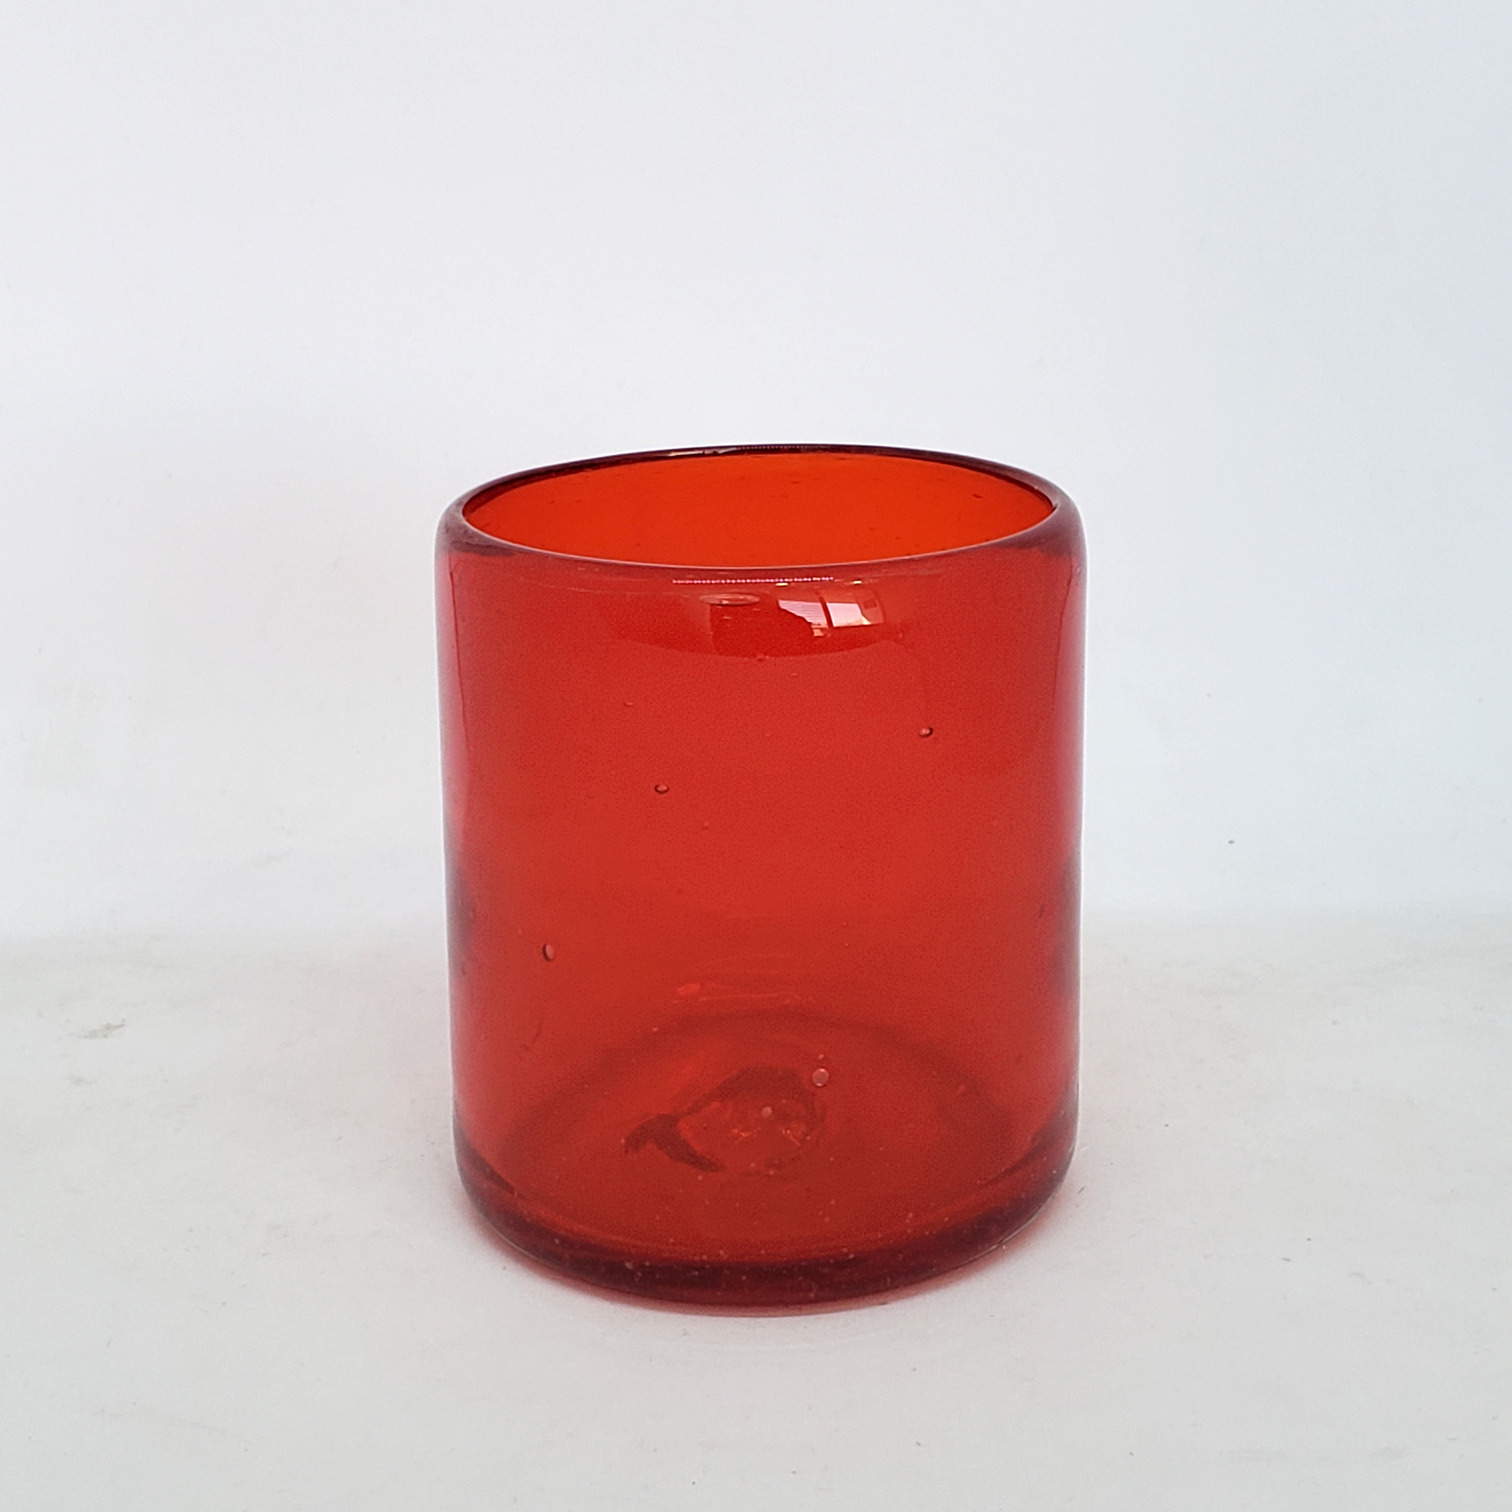 New Items / Solid Ruby Red 9 oz Short Tumblers  / Enhance your favorite drink with these colorful handcrafted glasses.